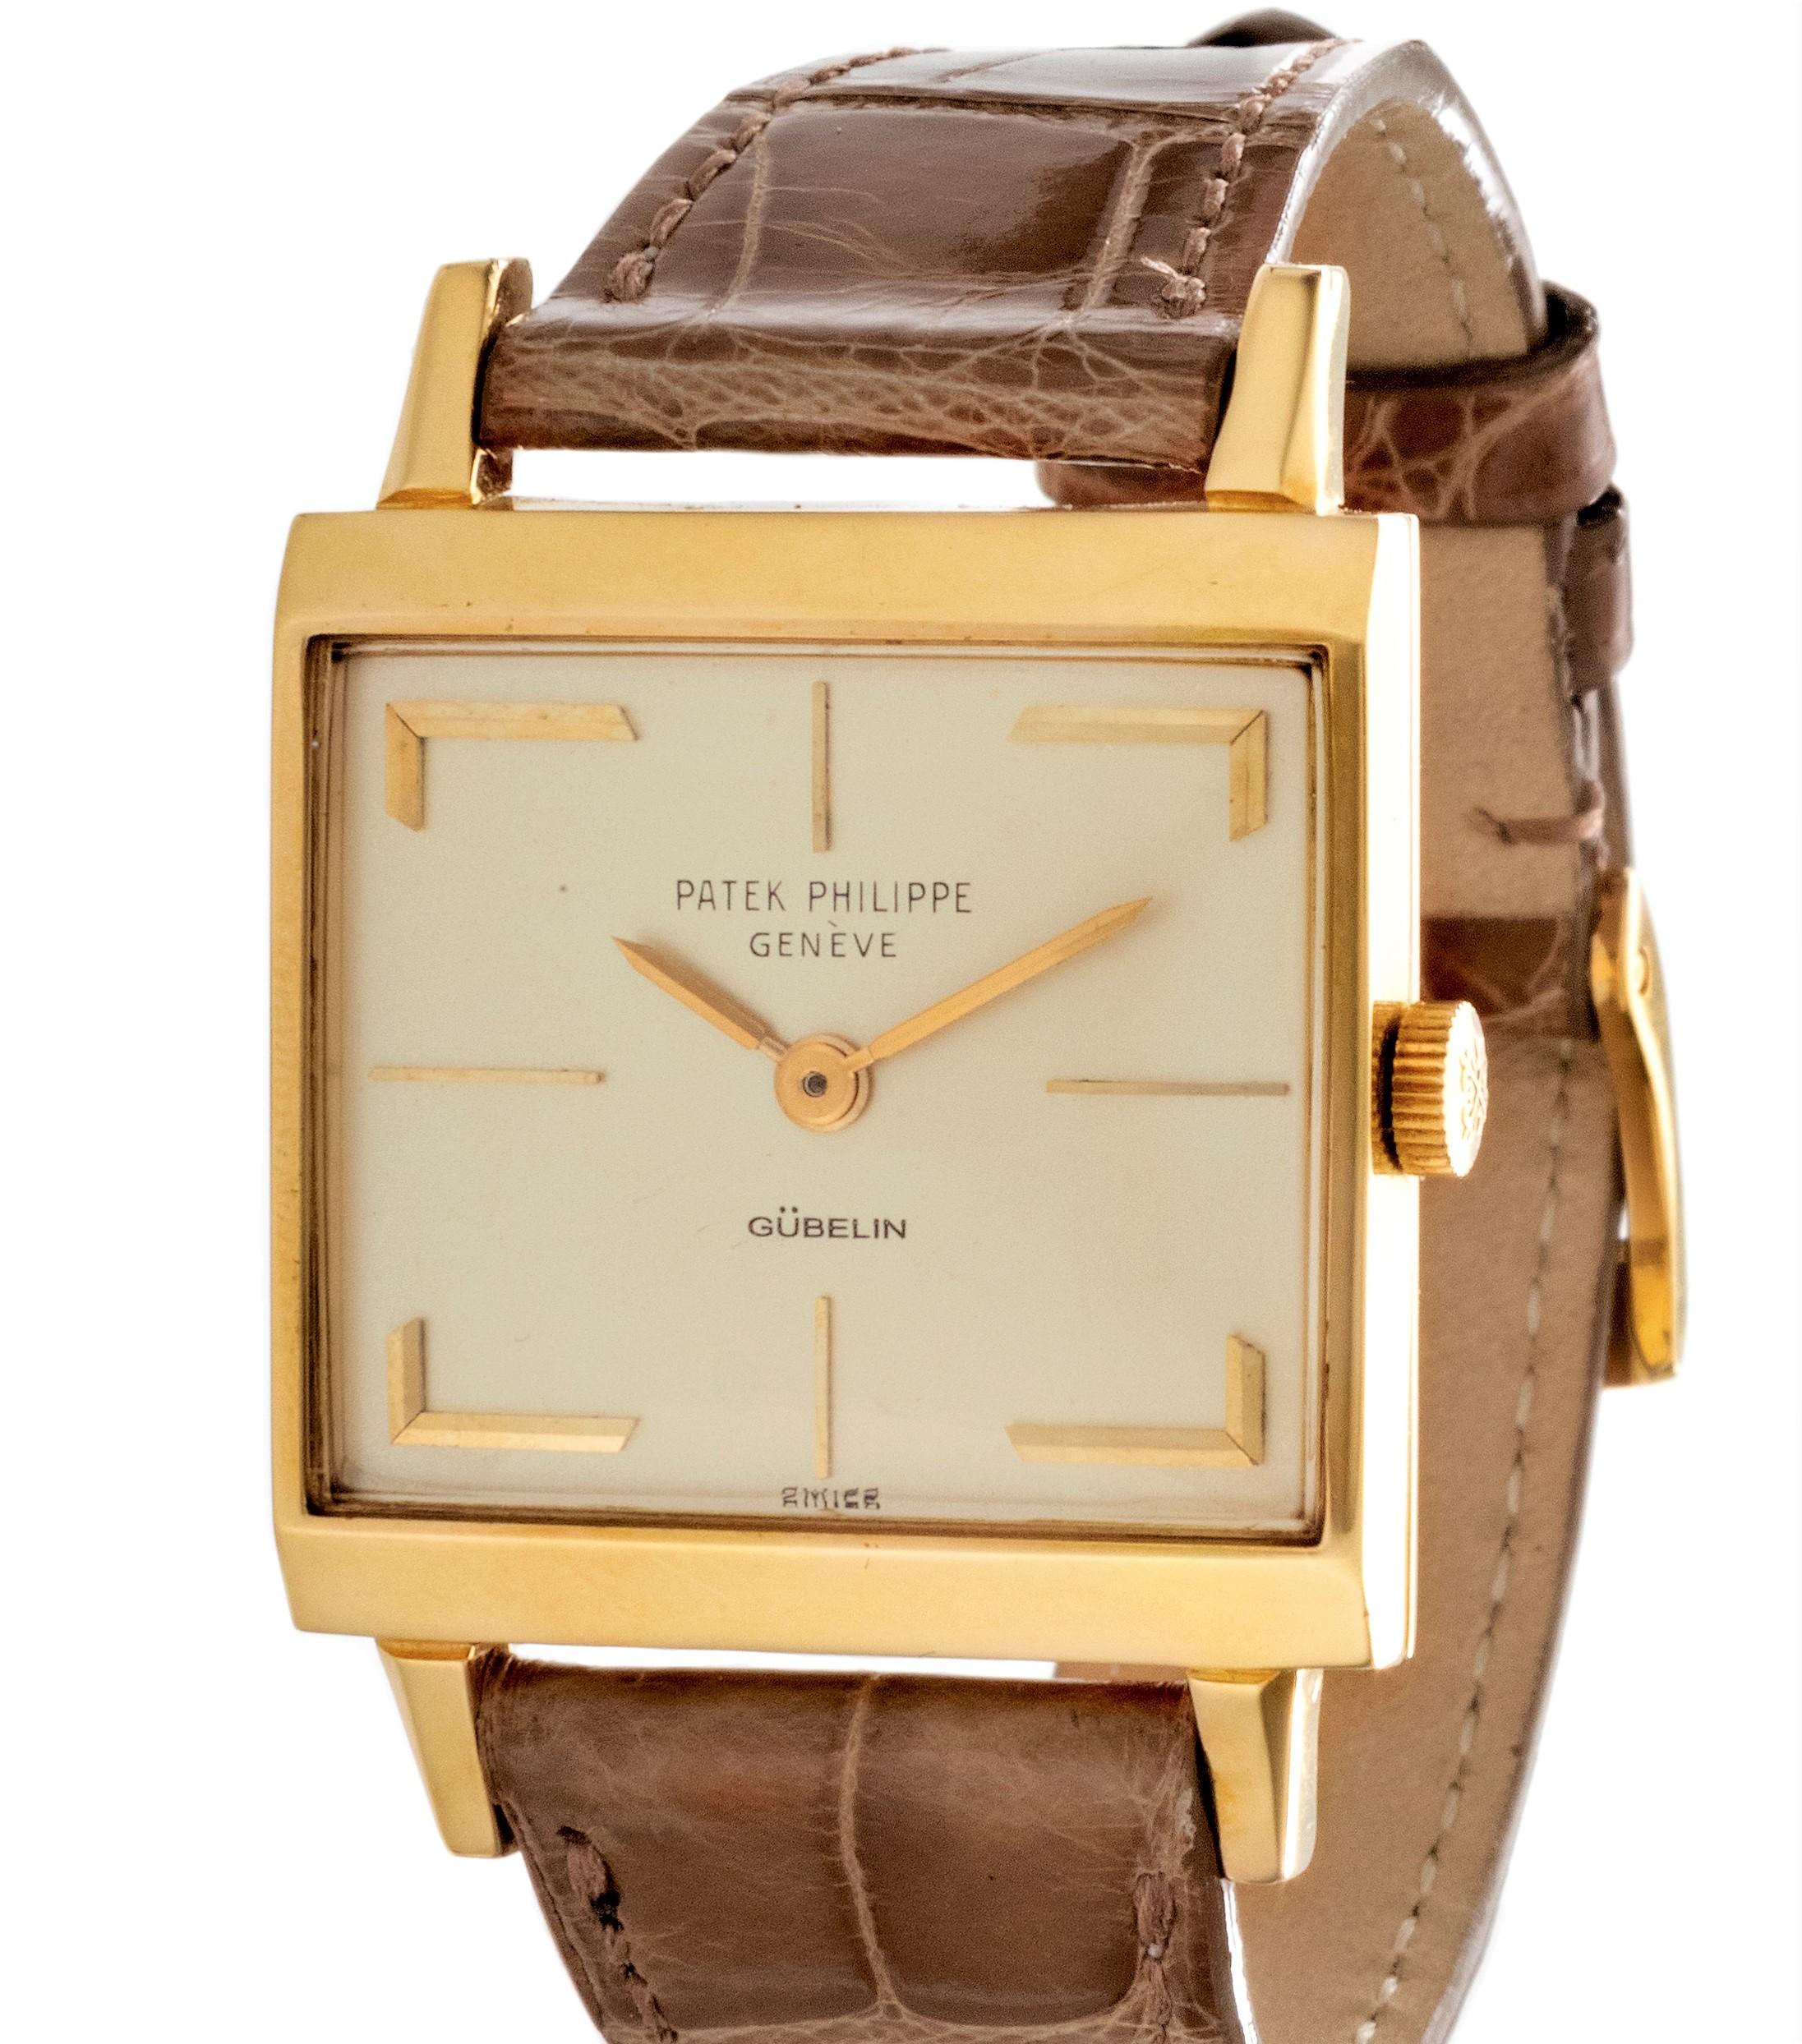 This 3406J Patek Philippe Art Deco watch features a 27 x 27 mm square case, with a white Hermes style dial.
The watch comes with an 18K yellow gold bracelet which was purchased after the watch was purchased in 1964.  The watch may be purchased with